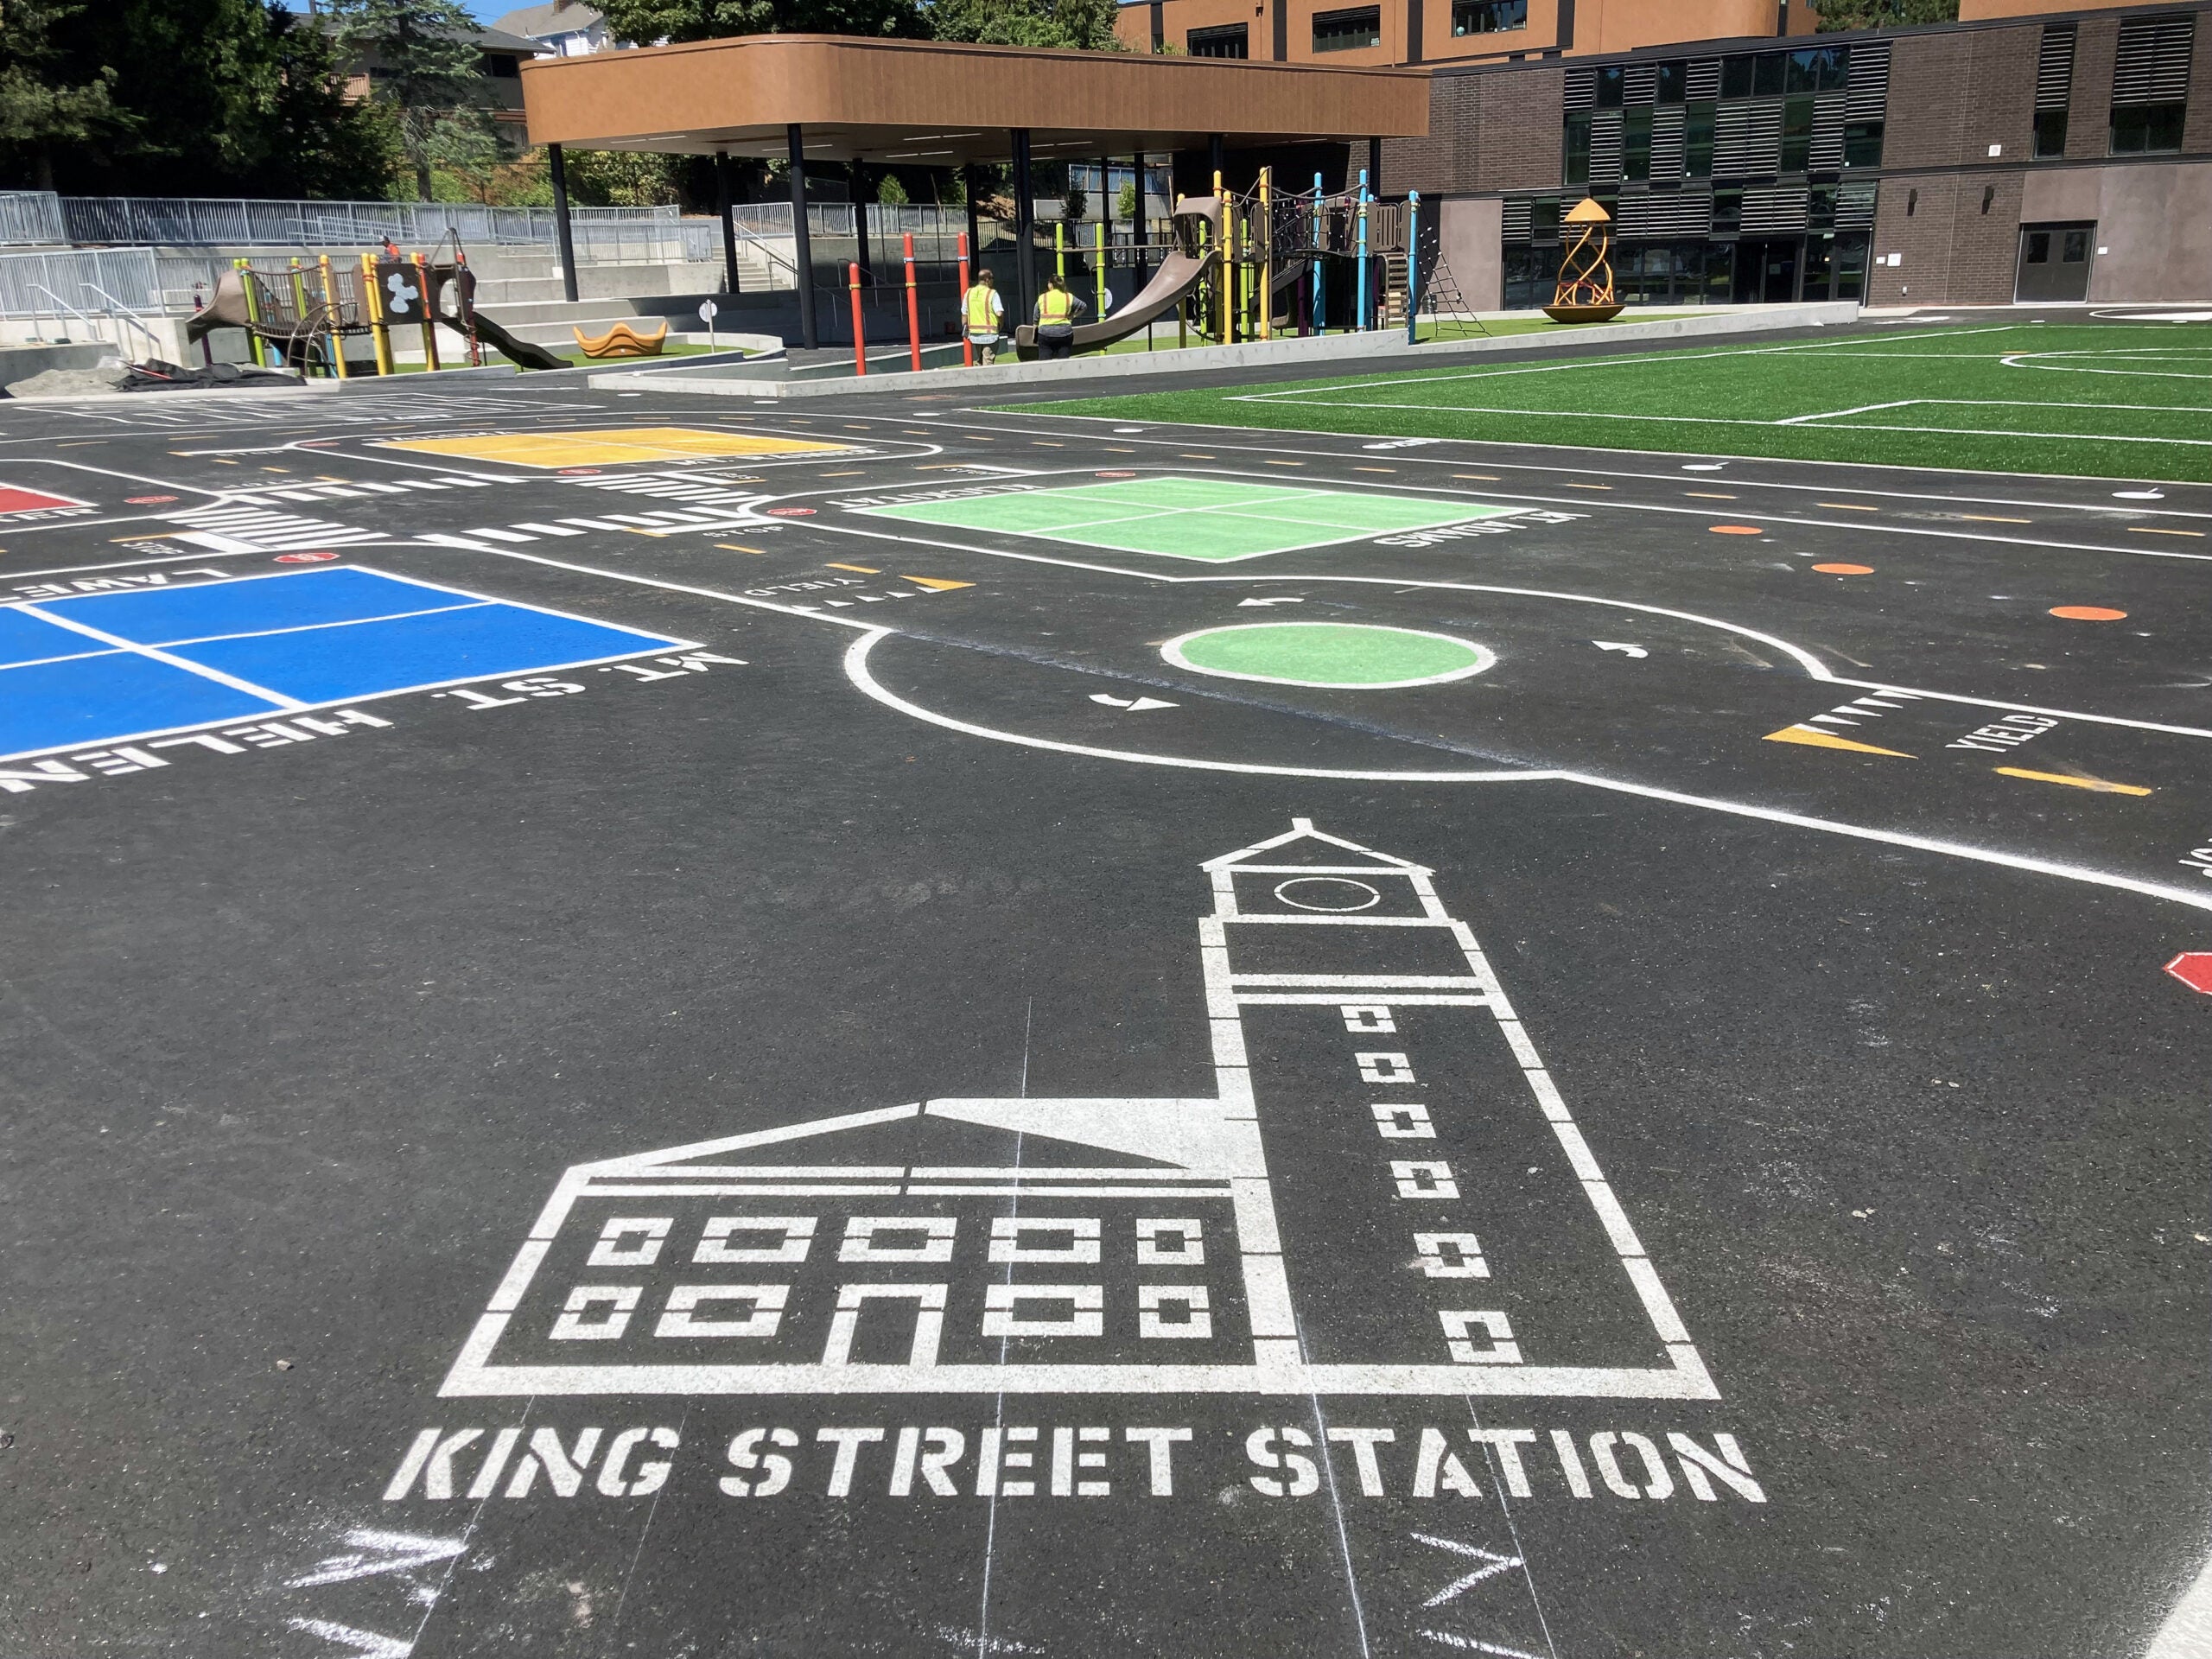 a paved area in front of a building has road lines and building outlines painted on it